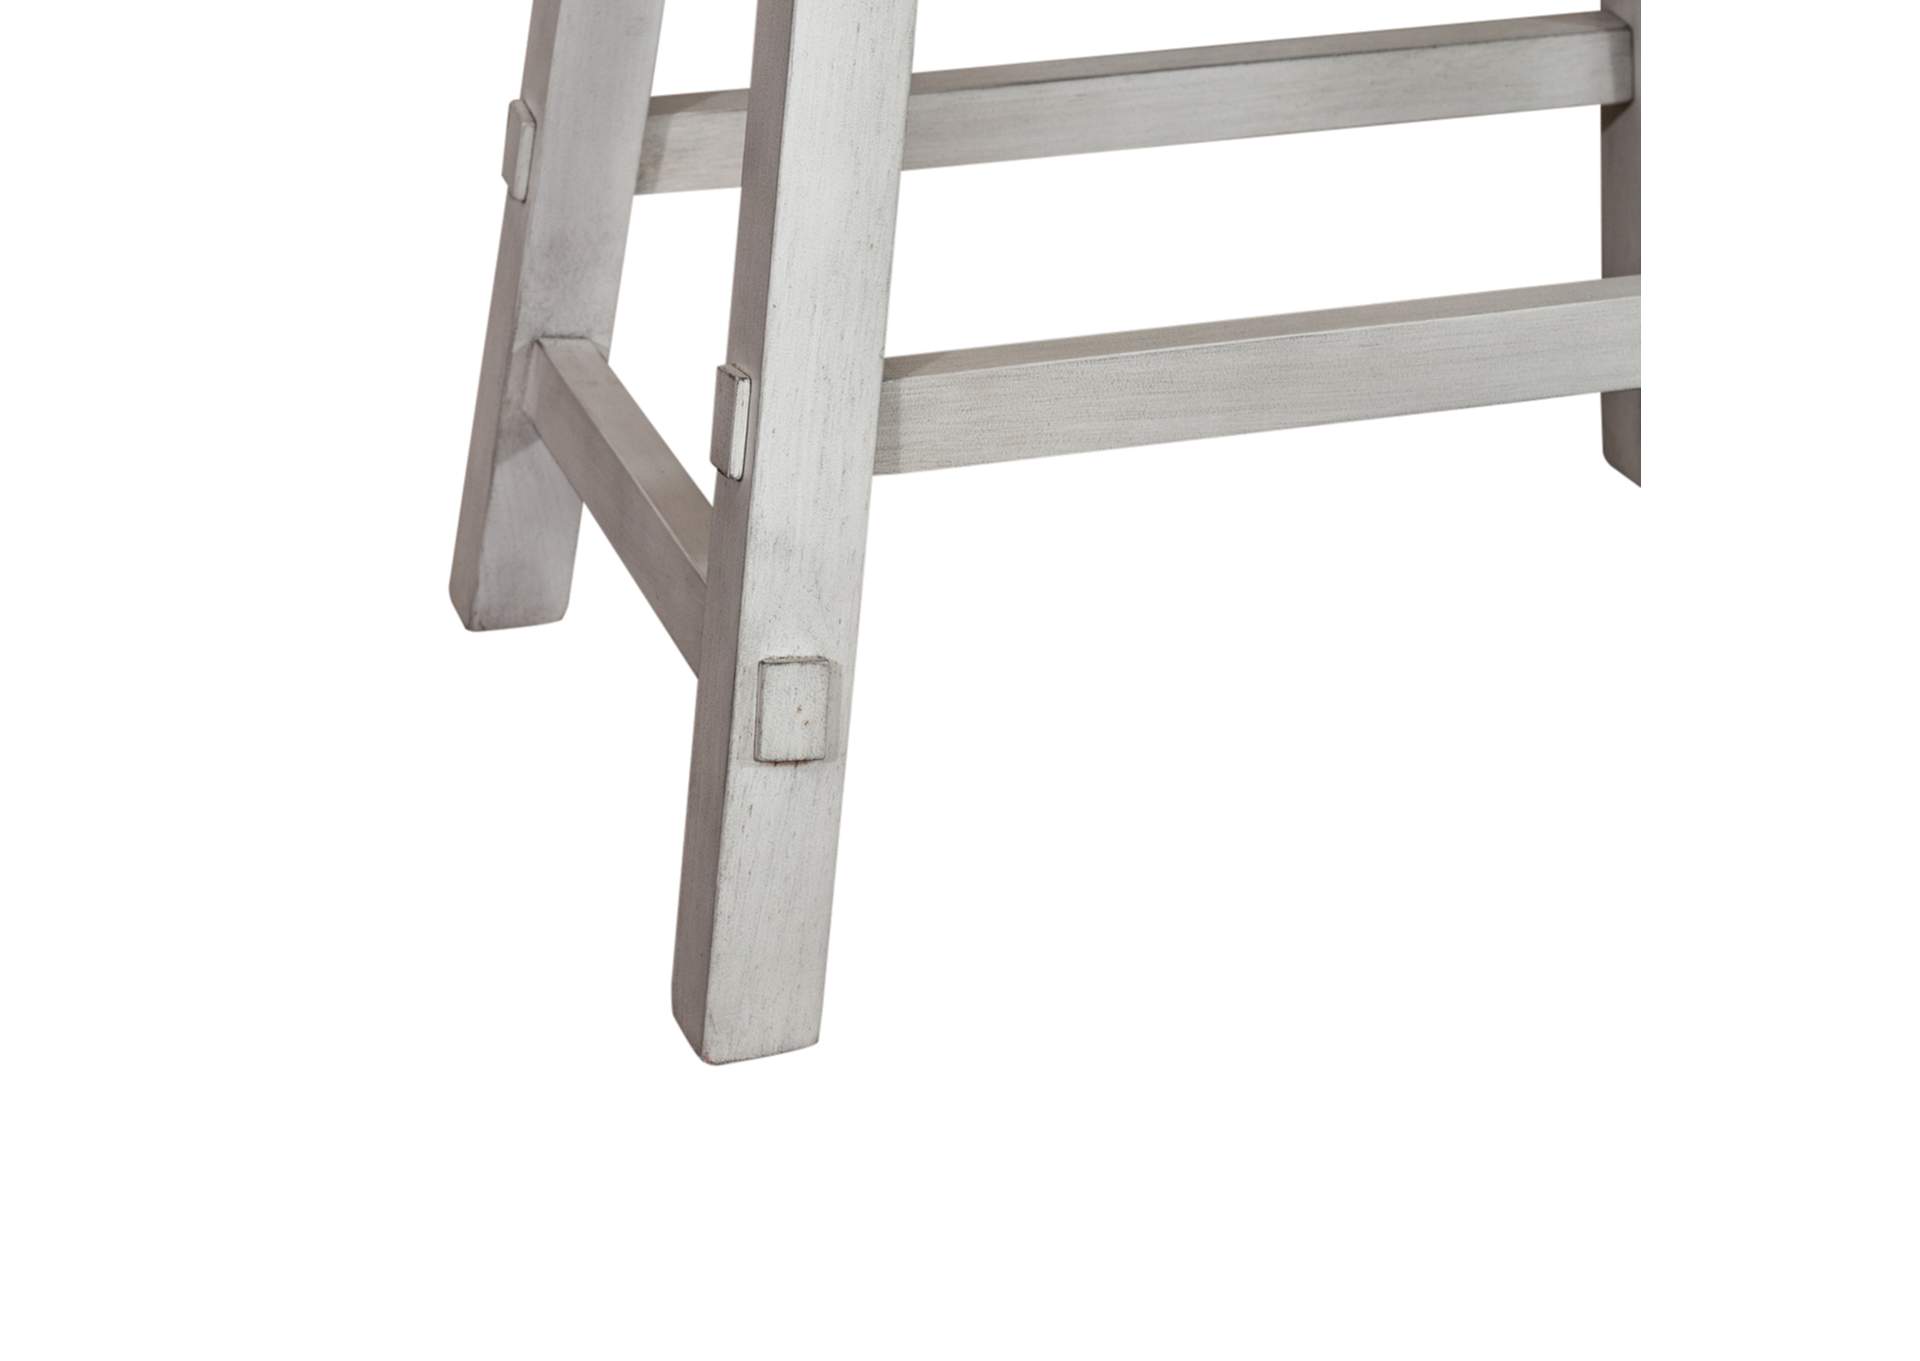 Creations 24 Inch Sawhorse Counter Stool - White,Liberty